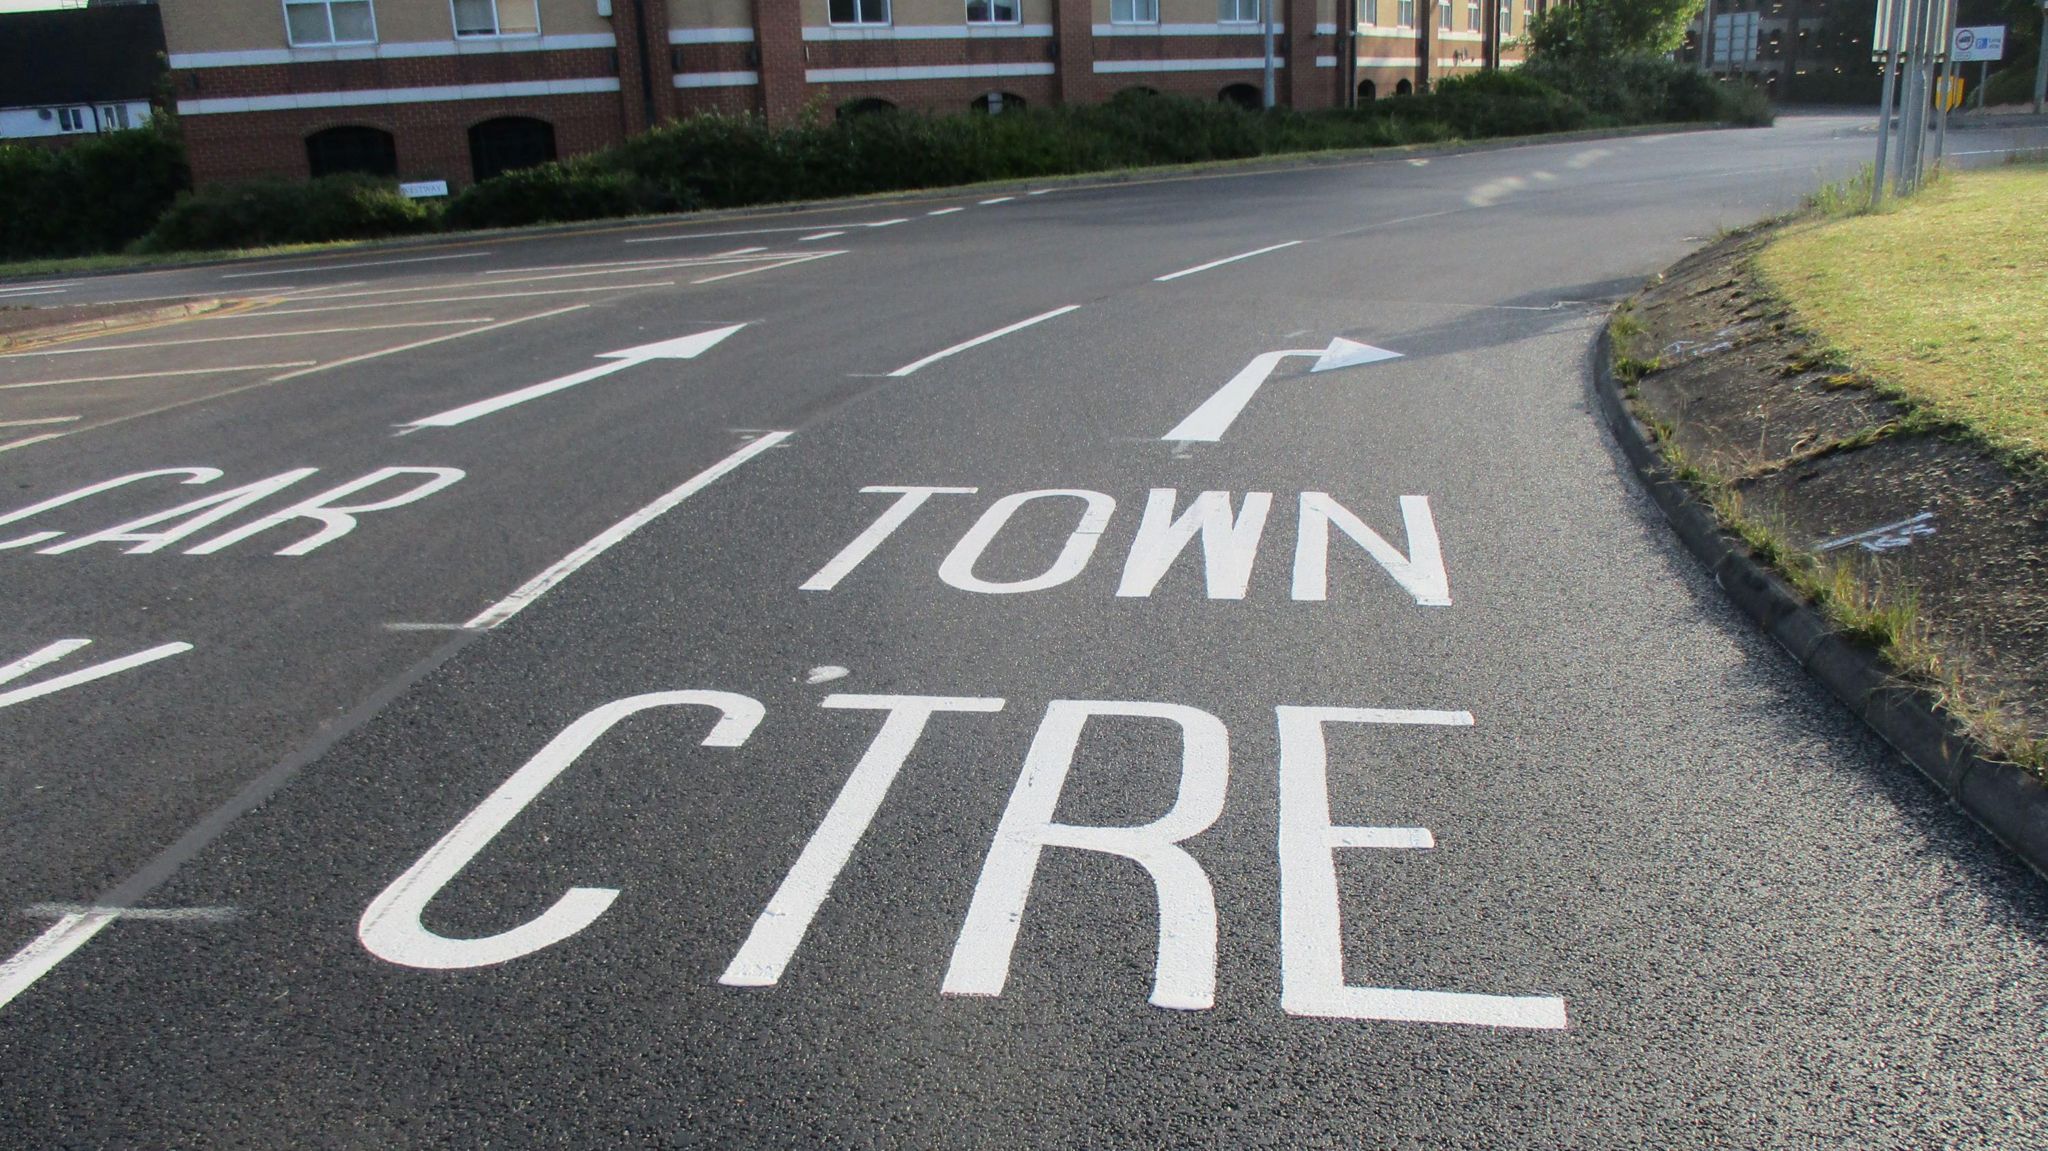 Road markings which read "town centre" when they should read "city centre"